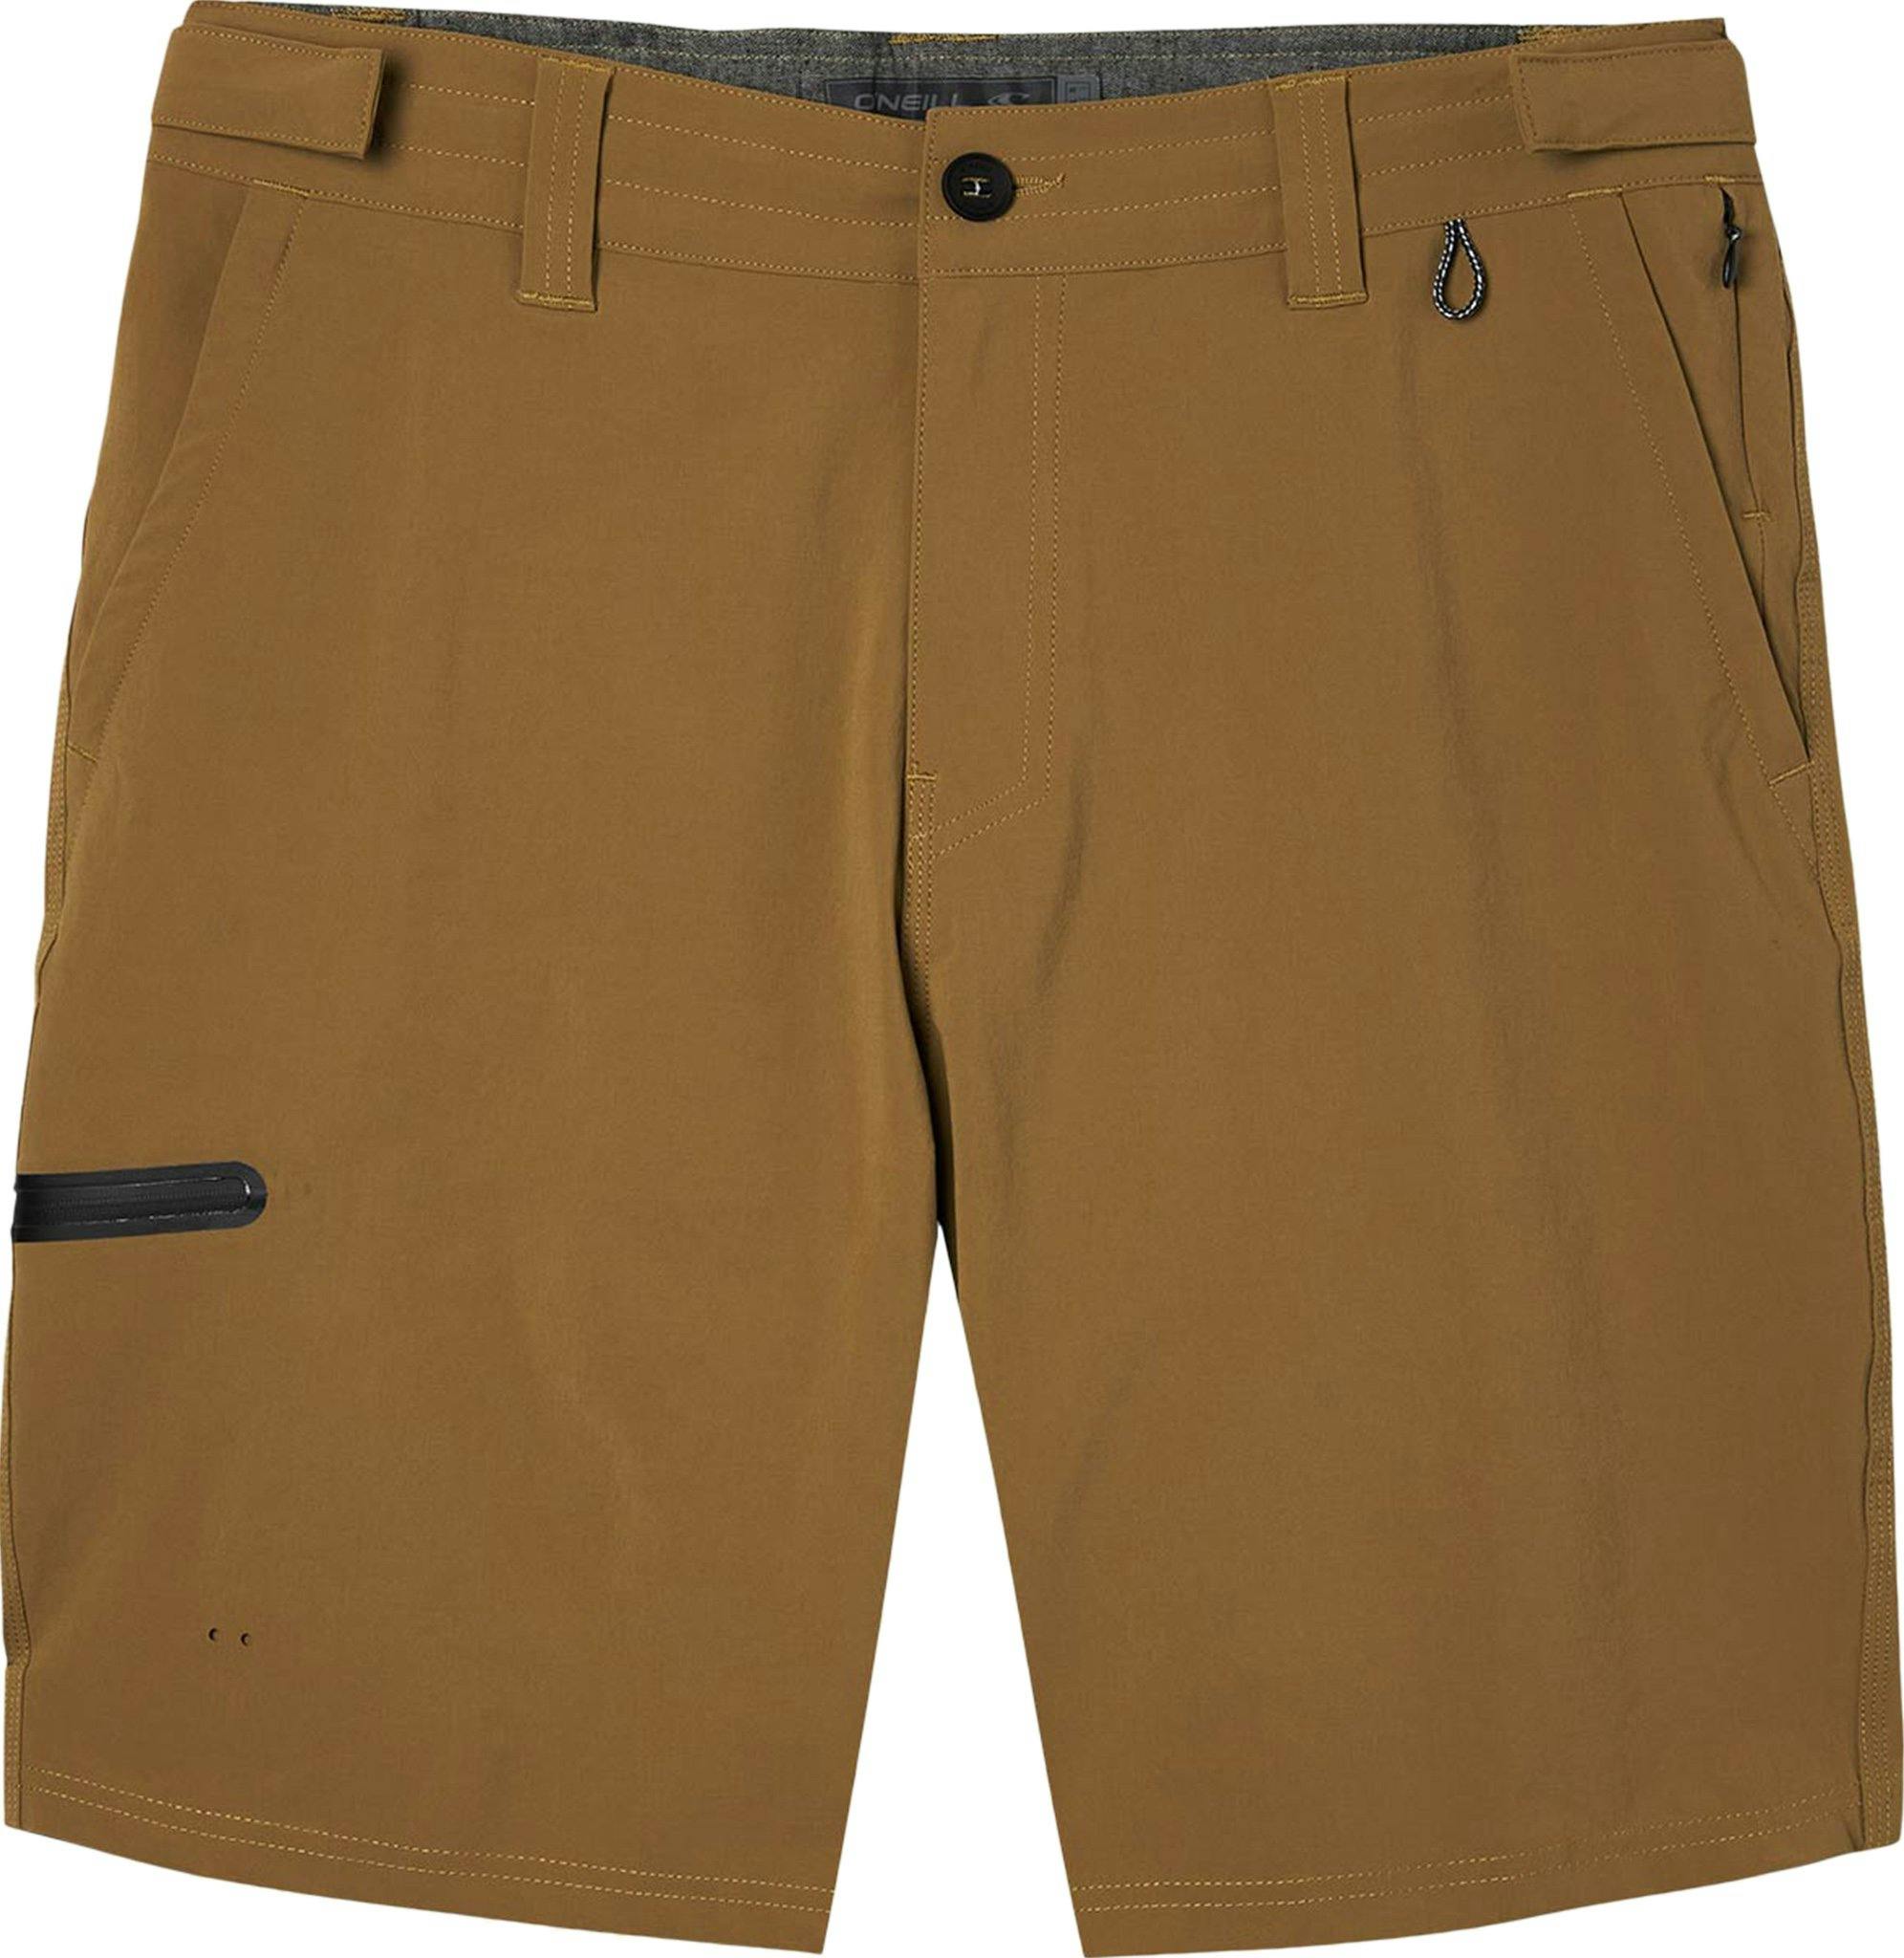 Product image for TRVLR Expedition 20 In Hybrid Shorts - Men's